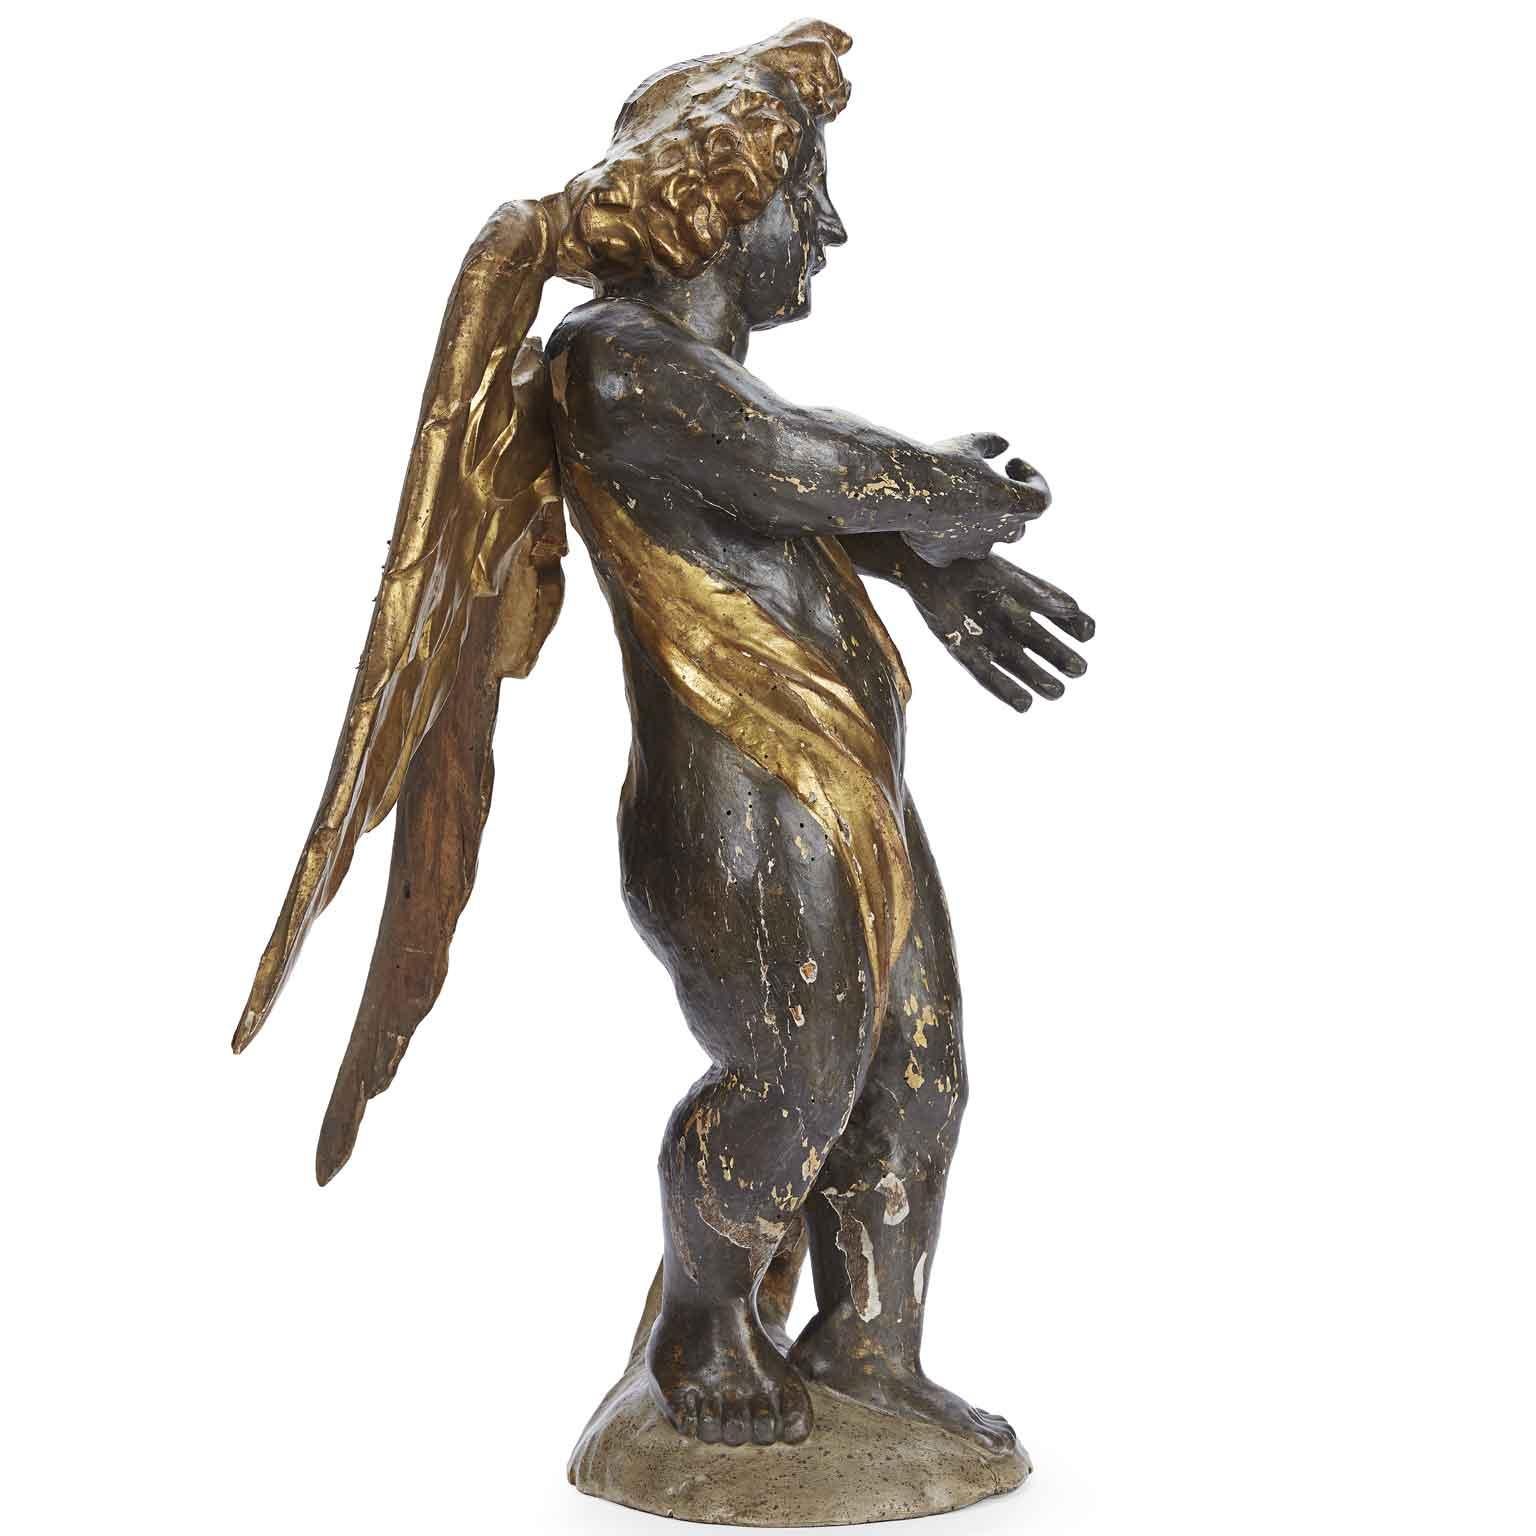 Italian Baroque Winged Putto Sculpture 17th Century Lombard School Carved Giltwood and Silvered Angel Figure
Winged Putto Lombard Italian Figure from 1600 Angel in Gilded and Silvered Carved pine wood. 17th-century carved and silvered wooden antique